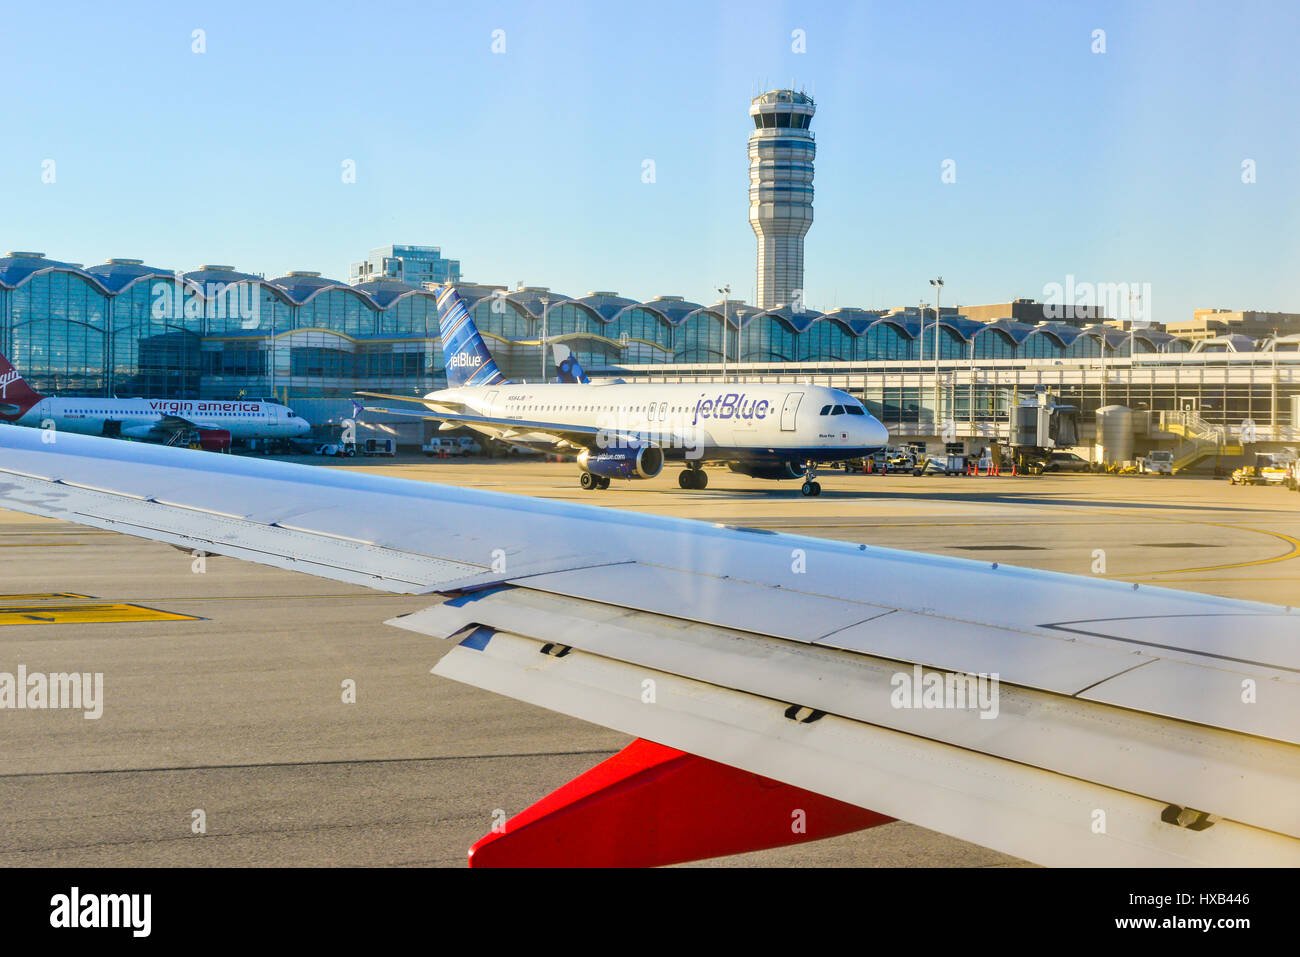 View of the Tampa, Florida airport terminal and control tower from taxiing Southwest Airlines jet on runway with a JetBlue airplane leaving gate Stock Photo